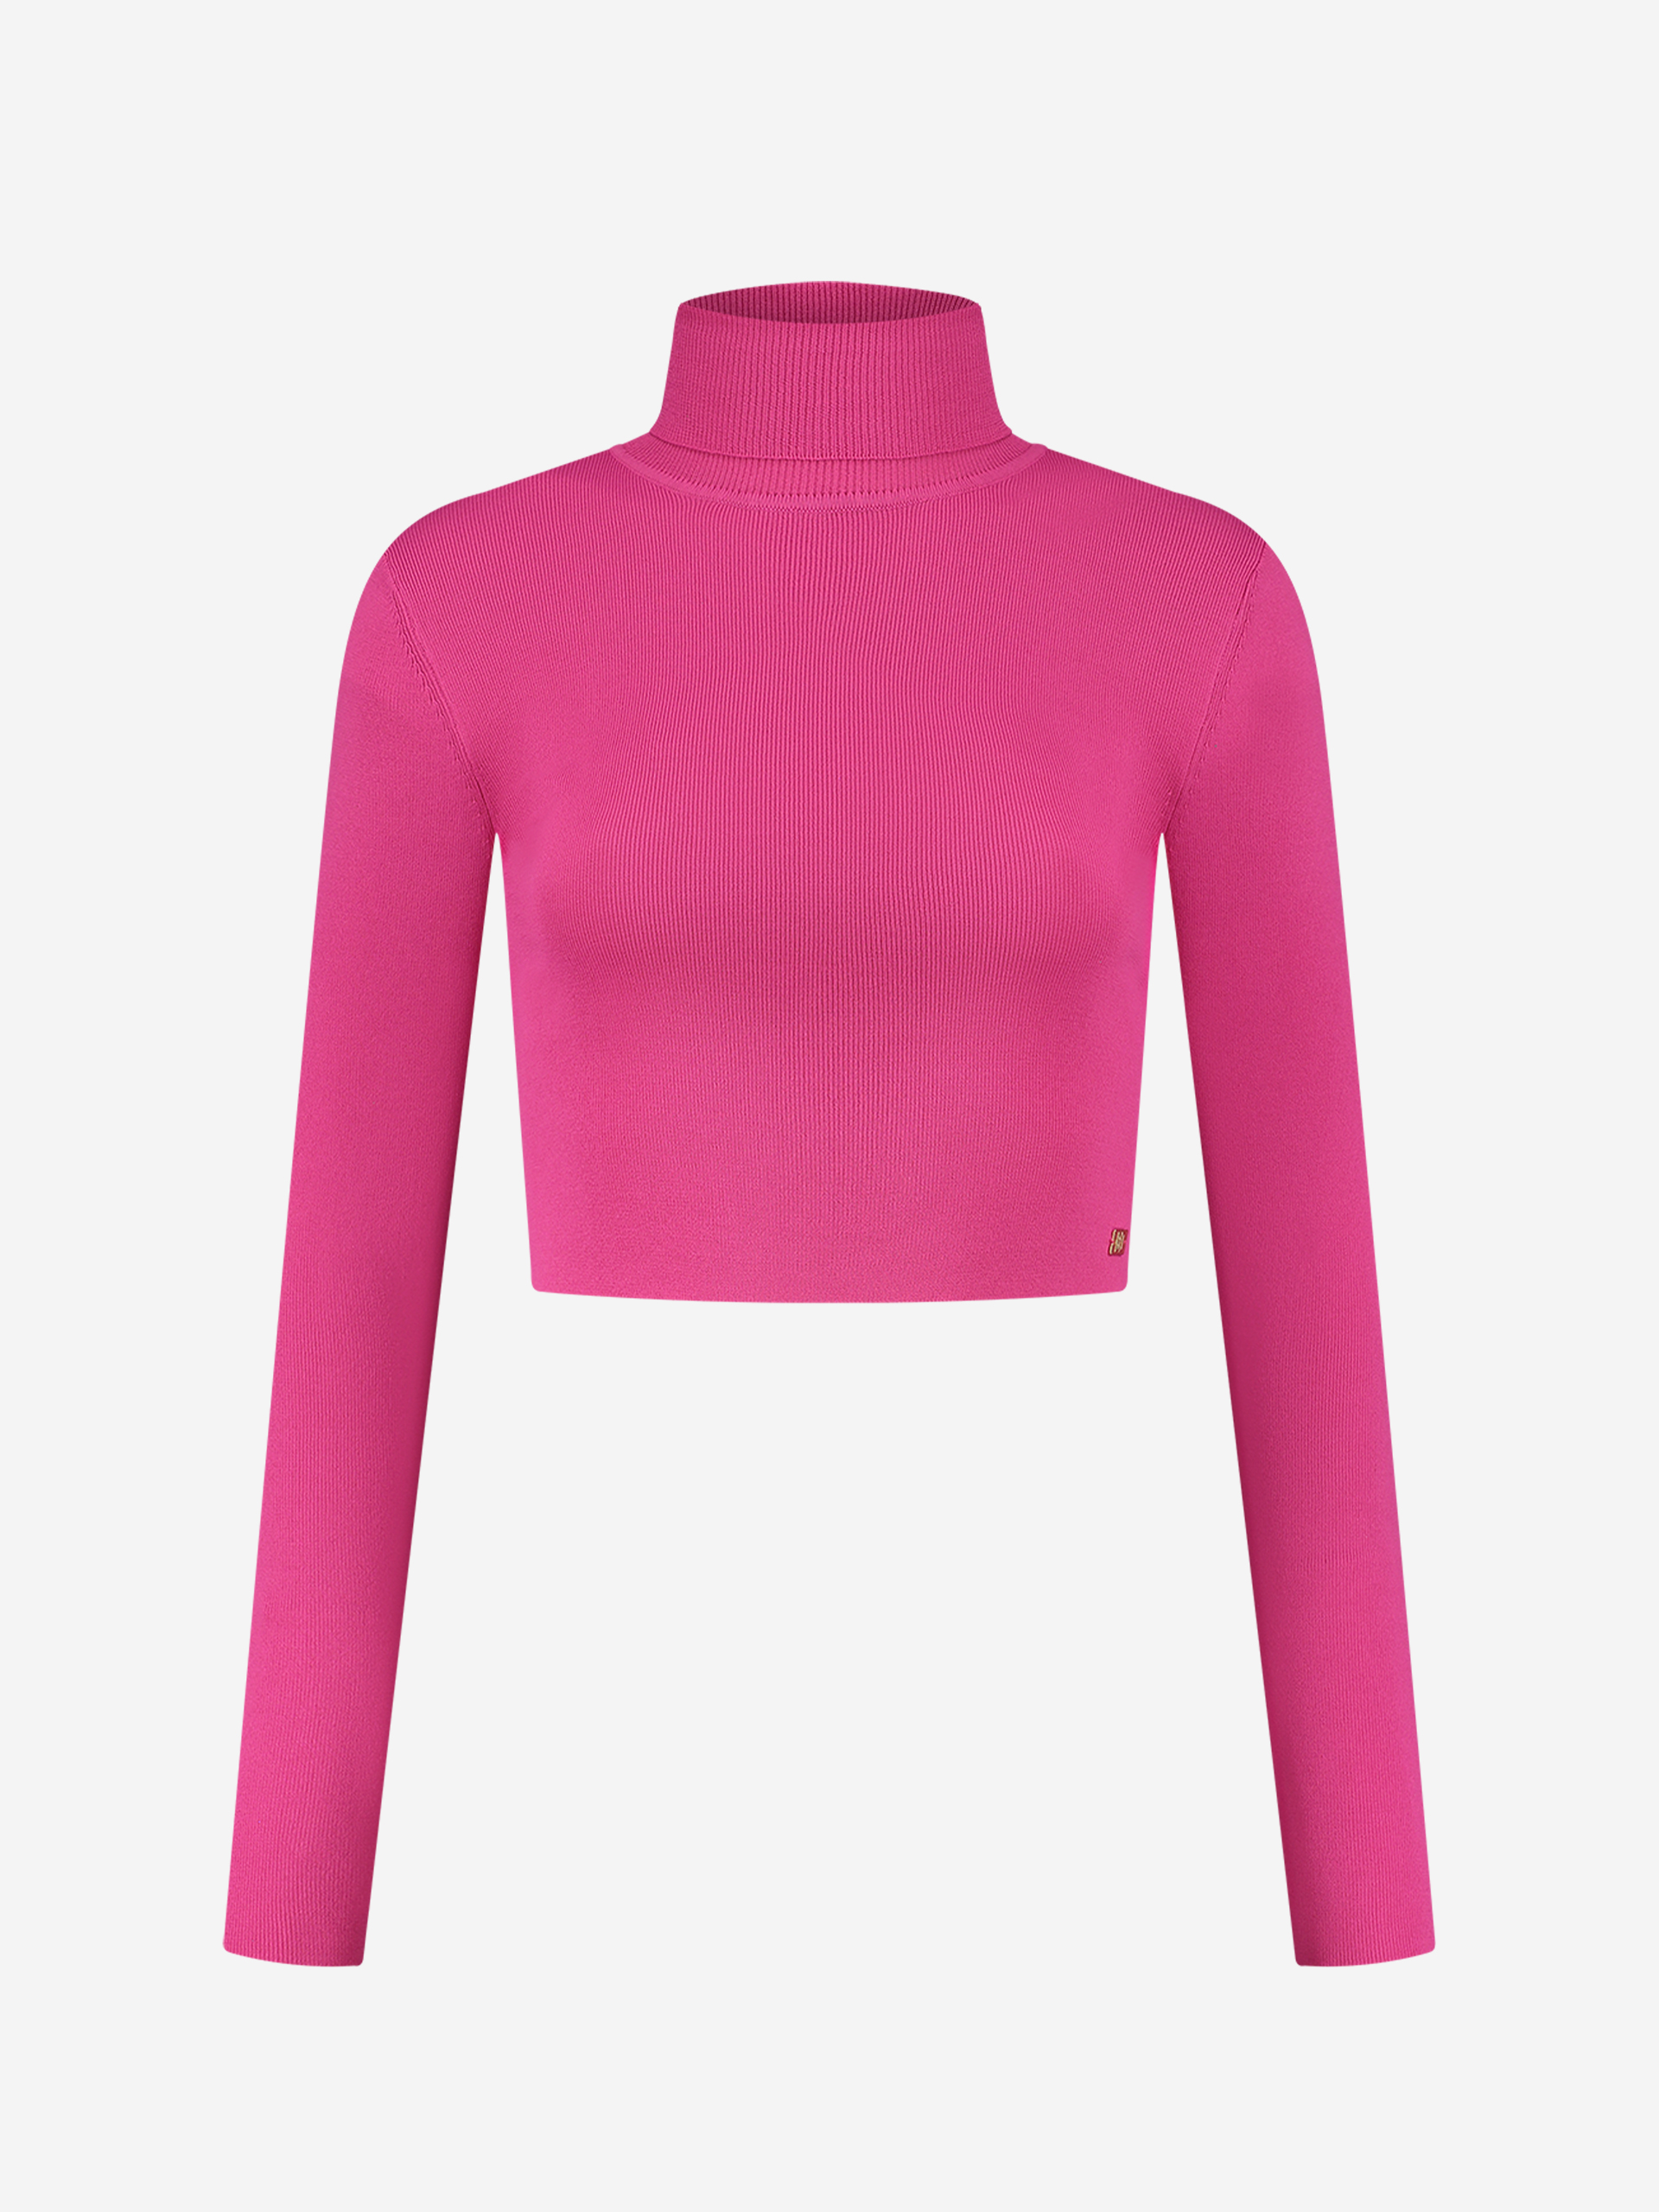  Fitted cropped longsleeve with turtle neck   